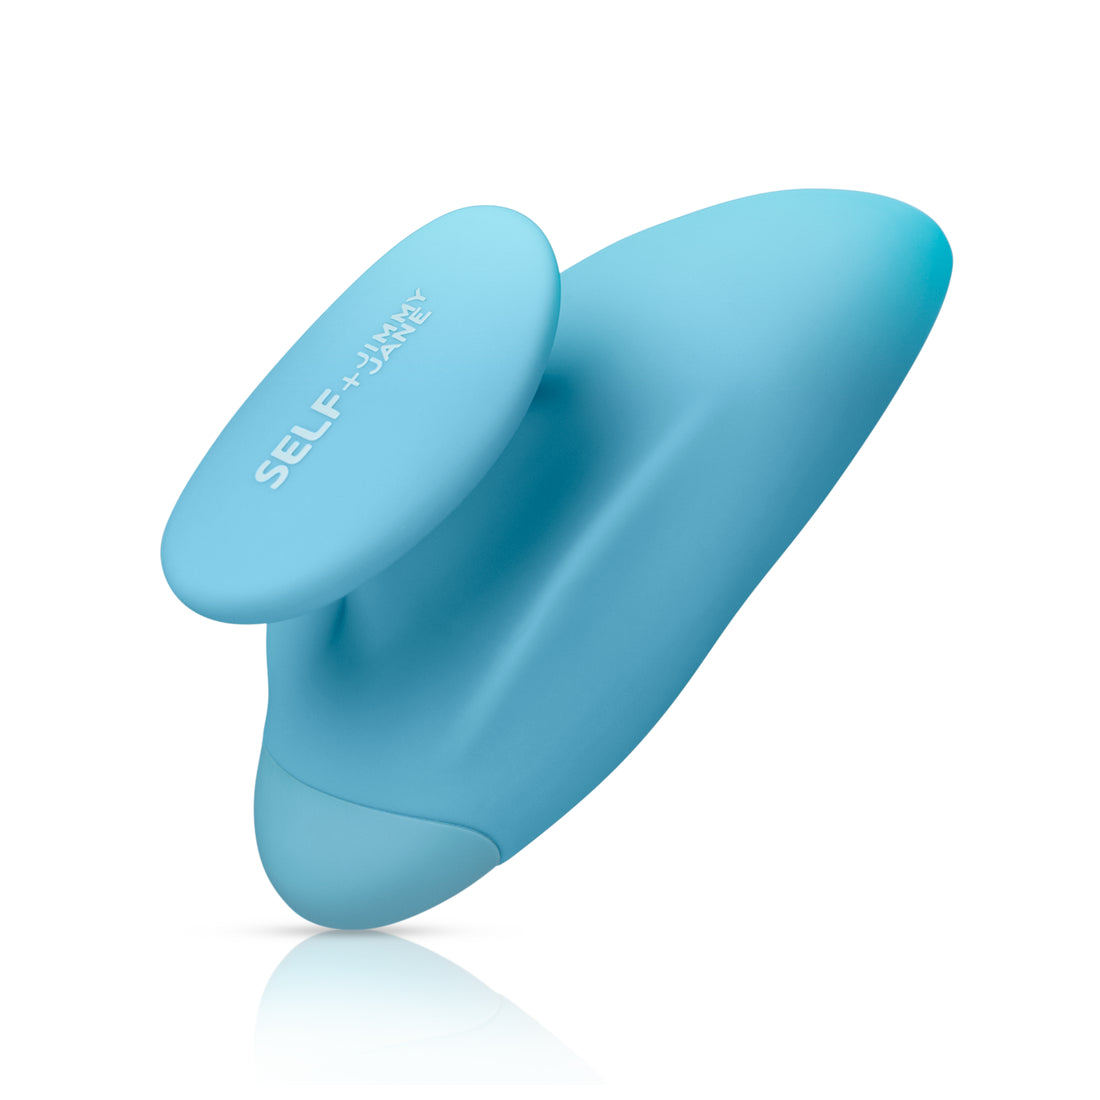 Self + Jimmyjane vibrating massager with finger grip in light blue 3/4 view